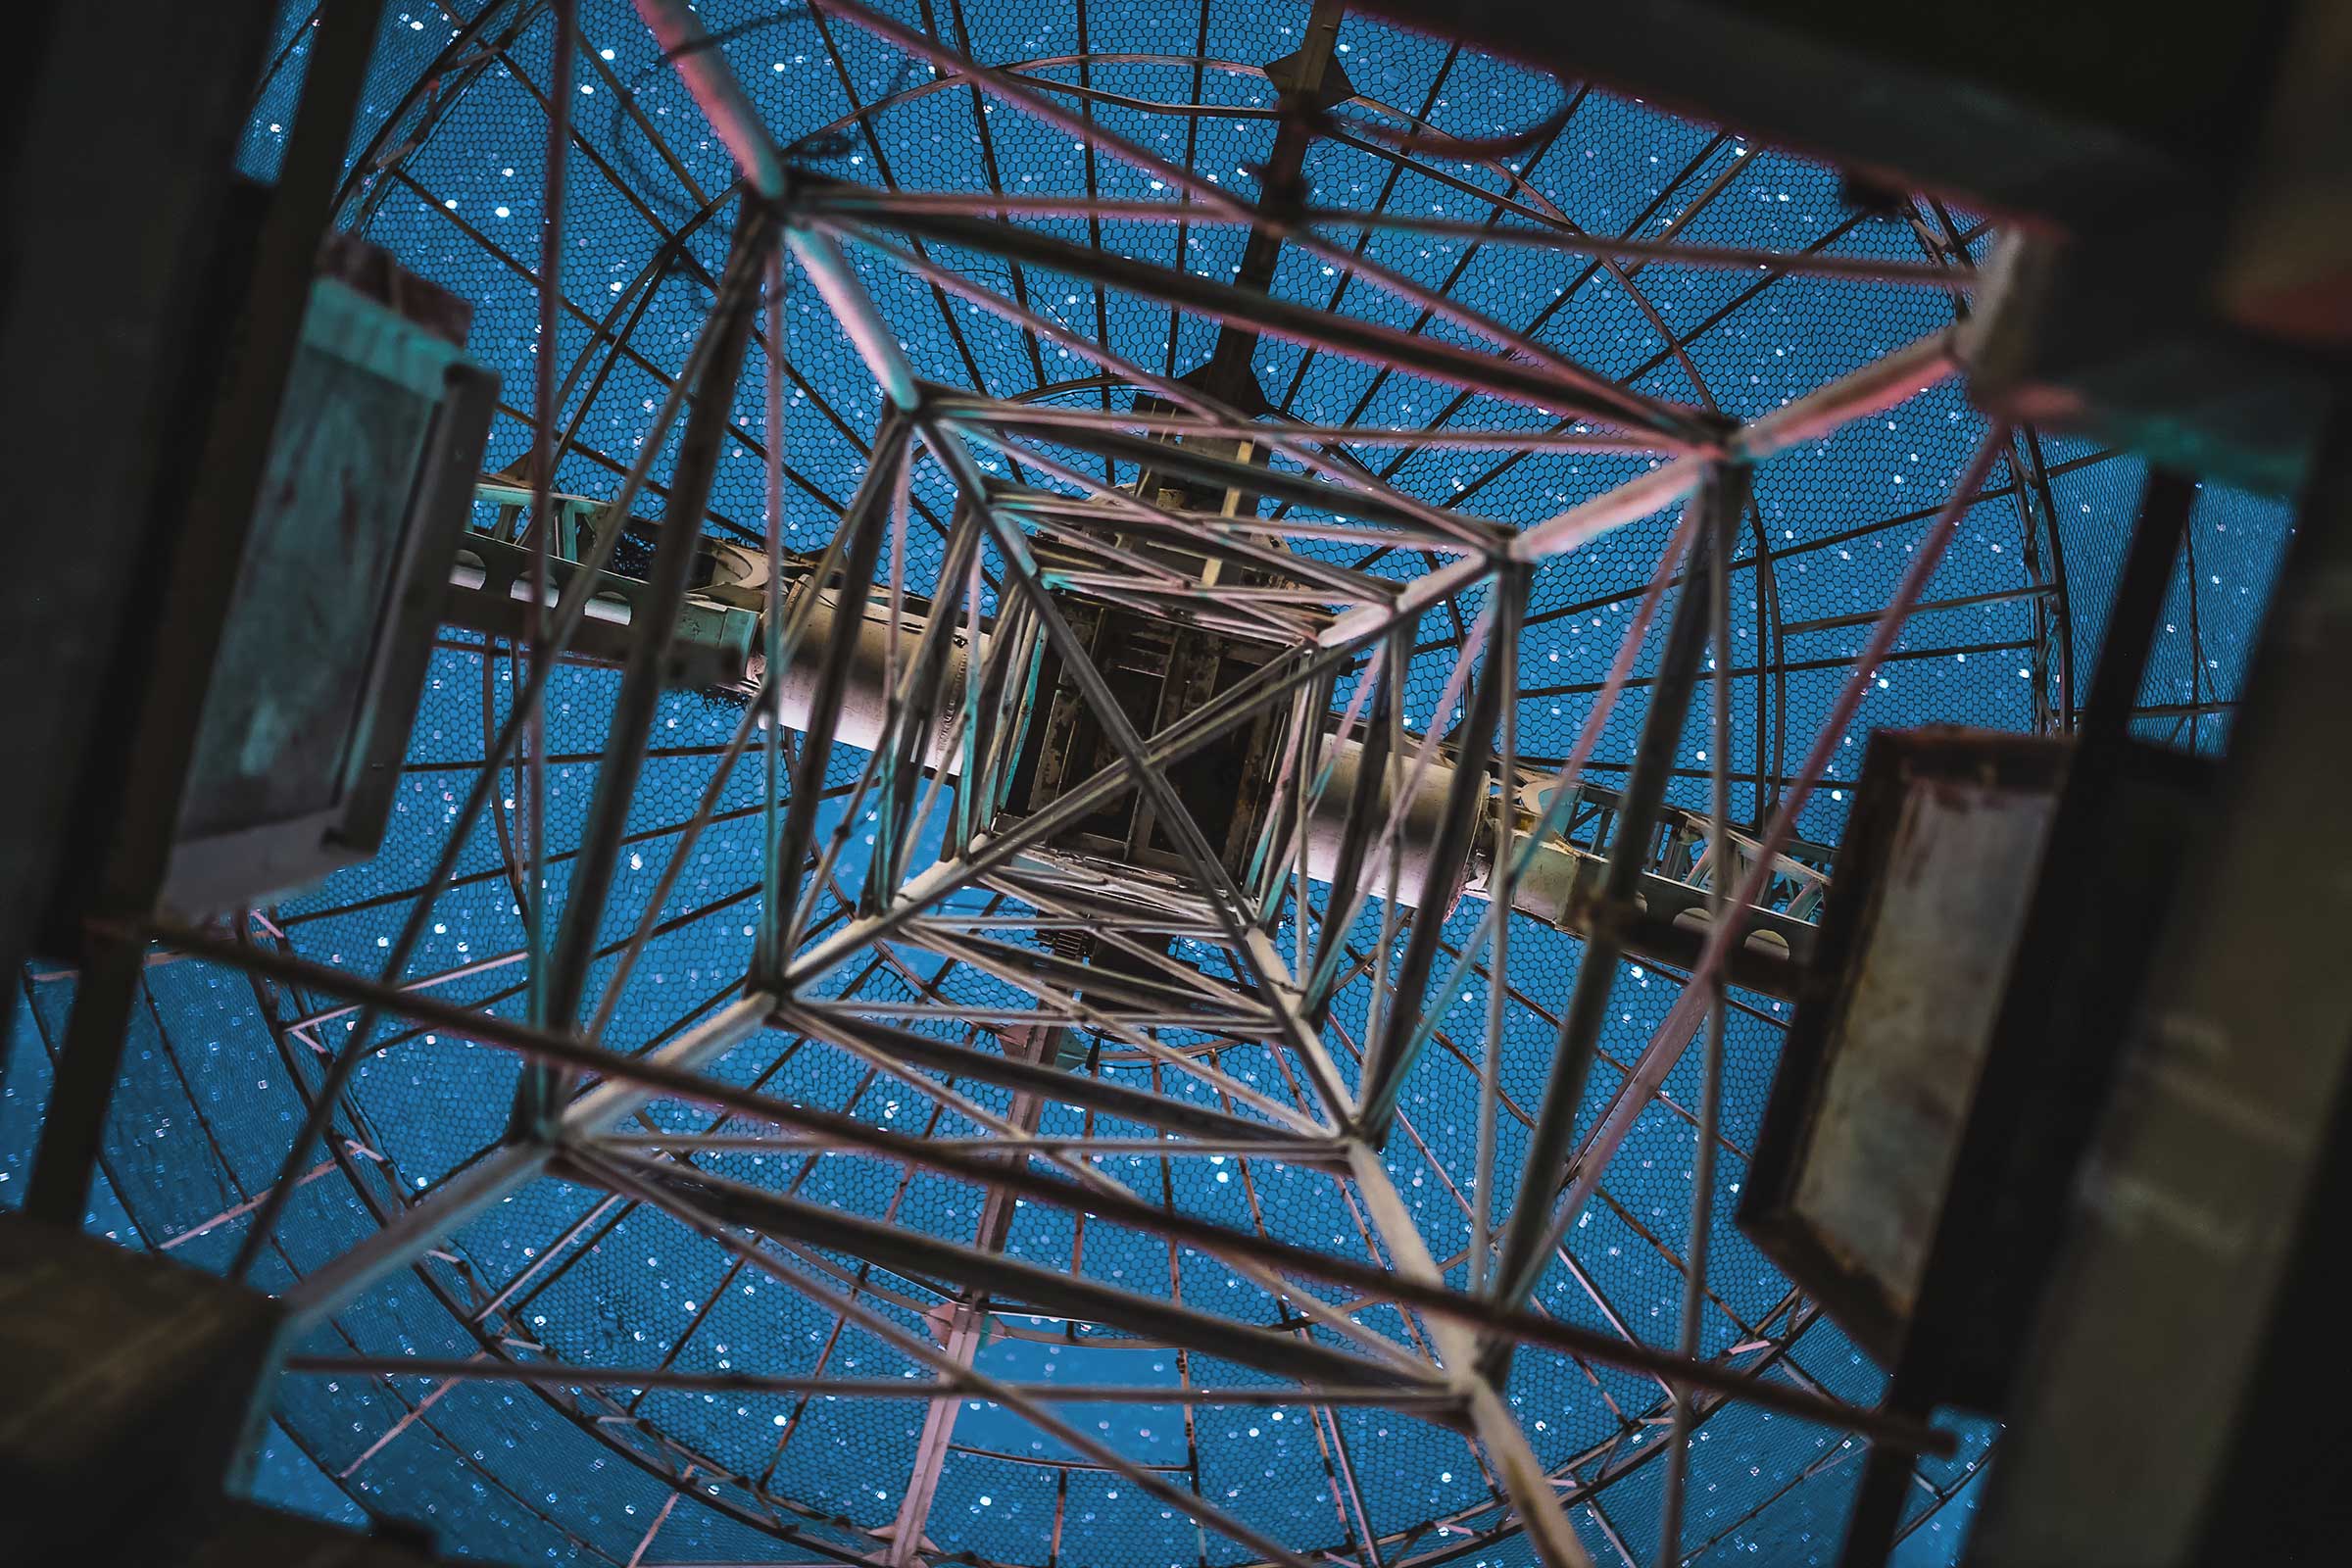 Looking at starry sky from below a radio telescope antenna